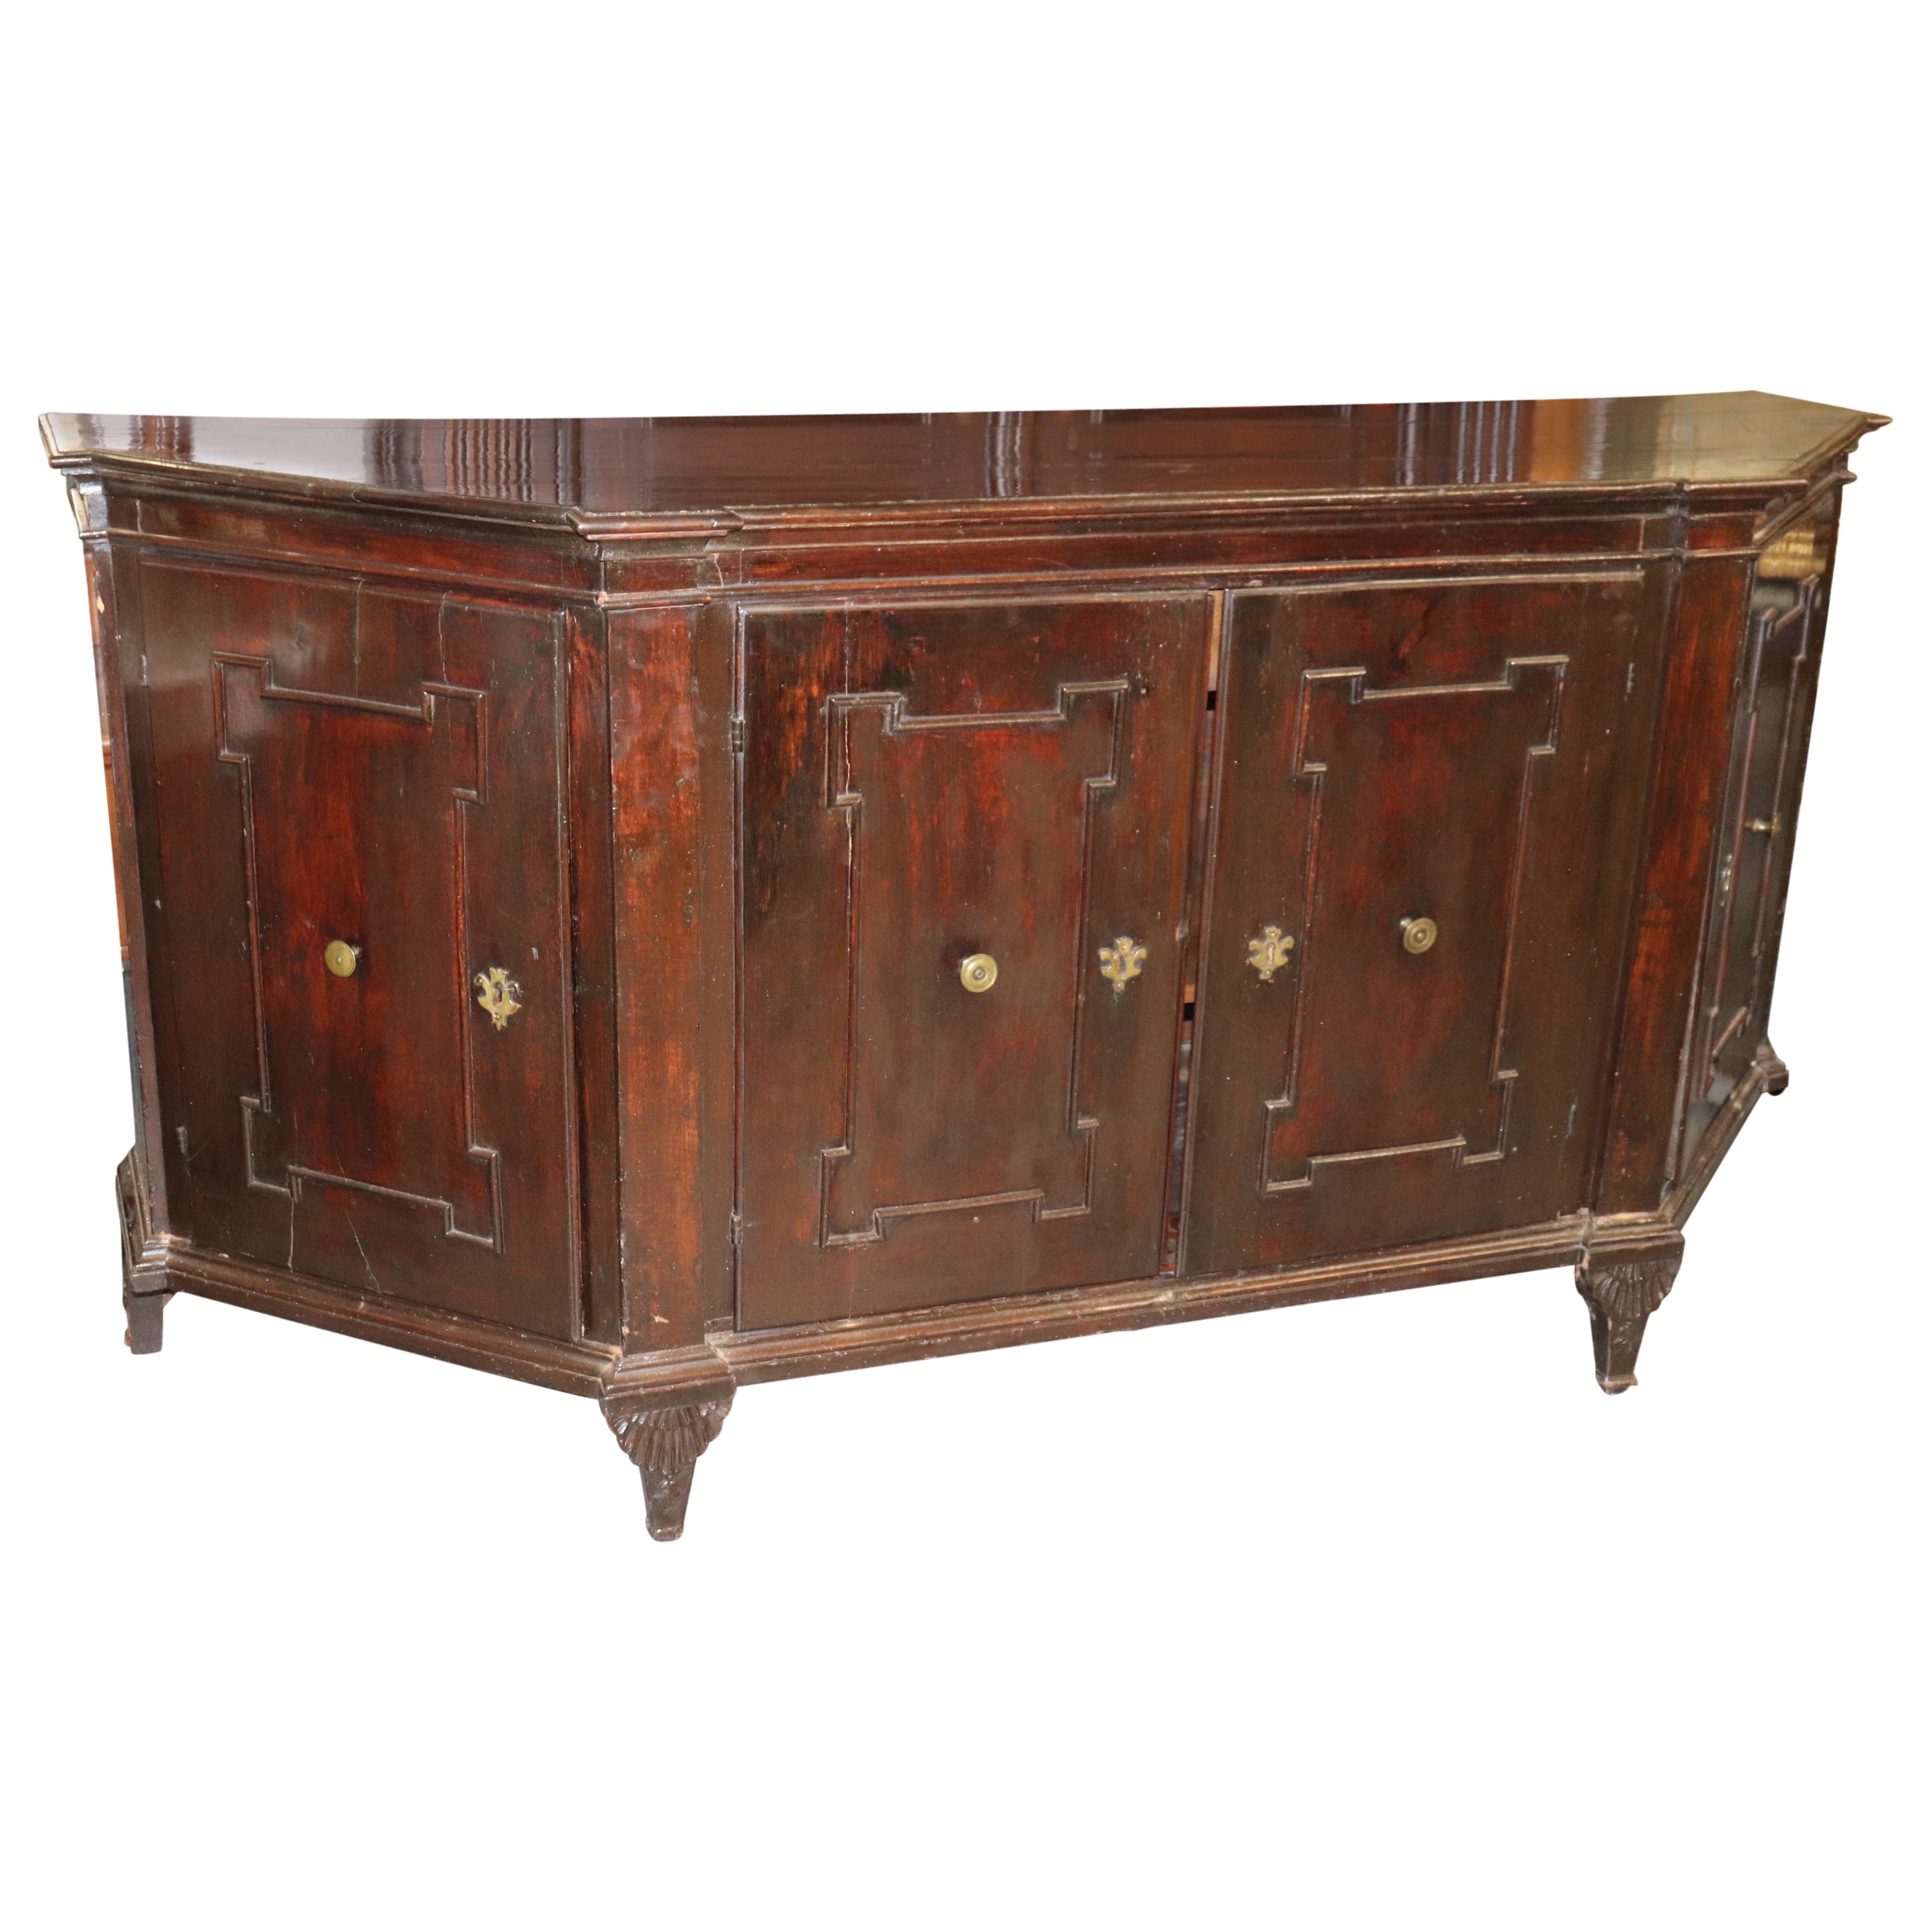 Rare Period French 1790s era Directoire Mahogany Sideboard Buffet For Sale